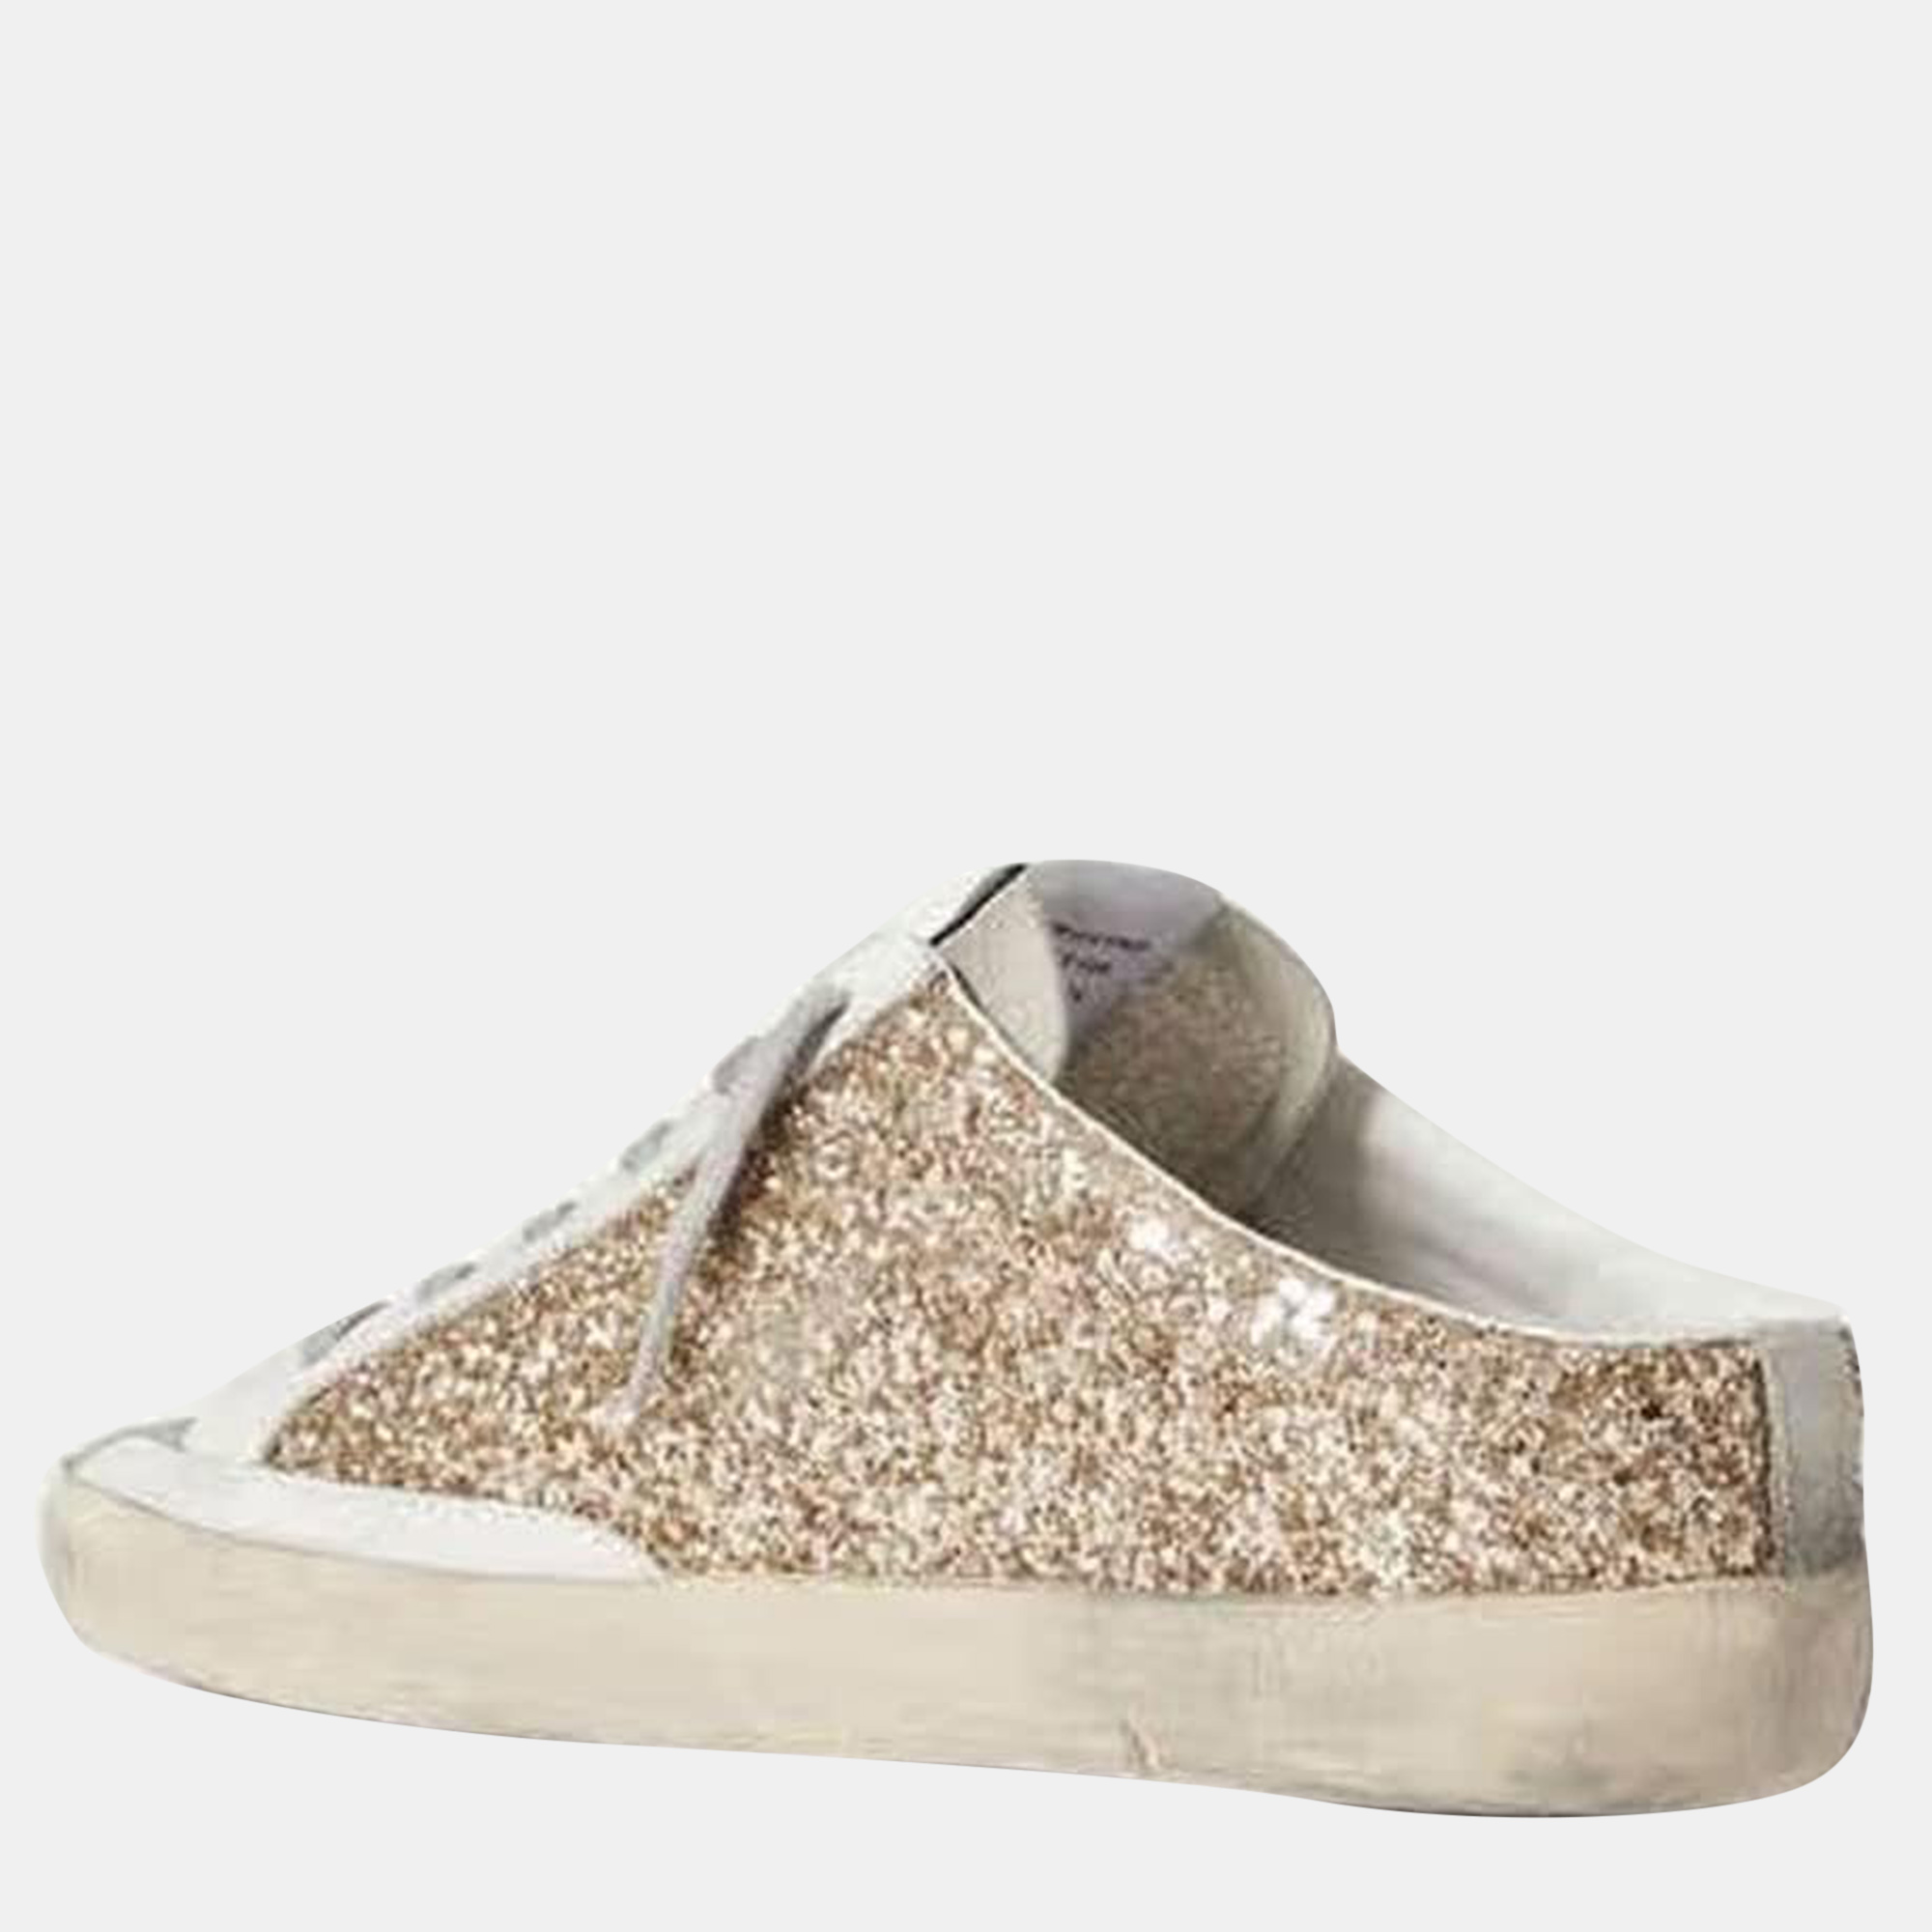 

Golden Goose Sneakers Women Casual Party Glitter Bling Shoes Breathable Soft Muller Slippers EU, Metallic